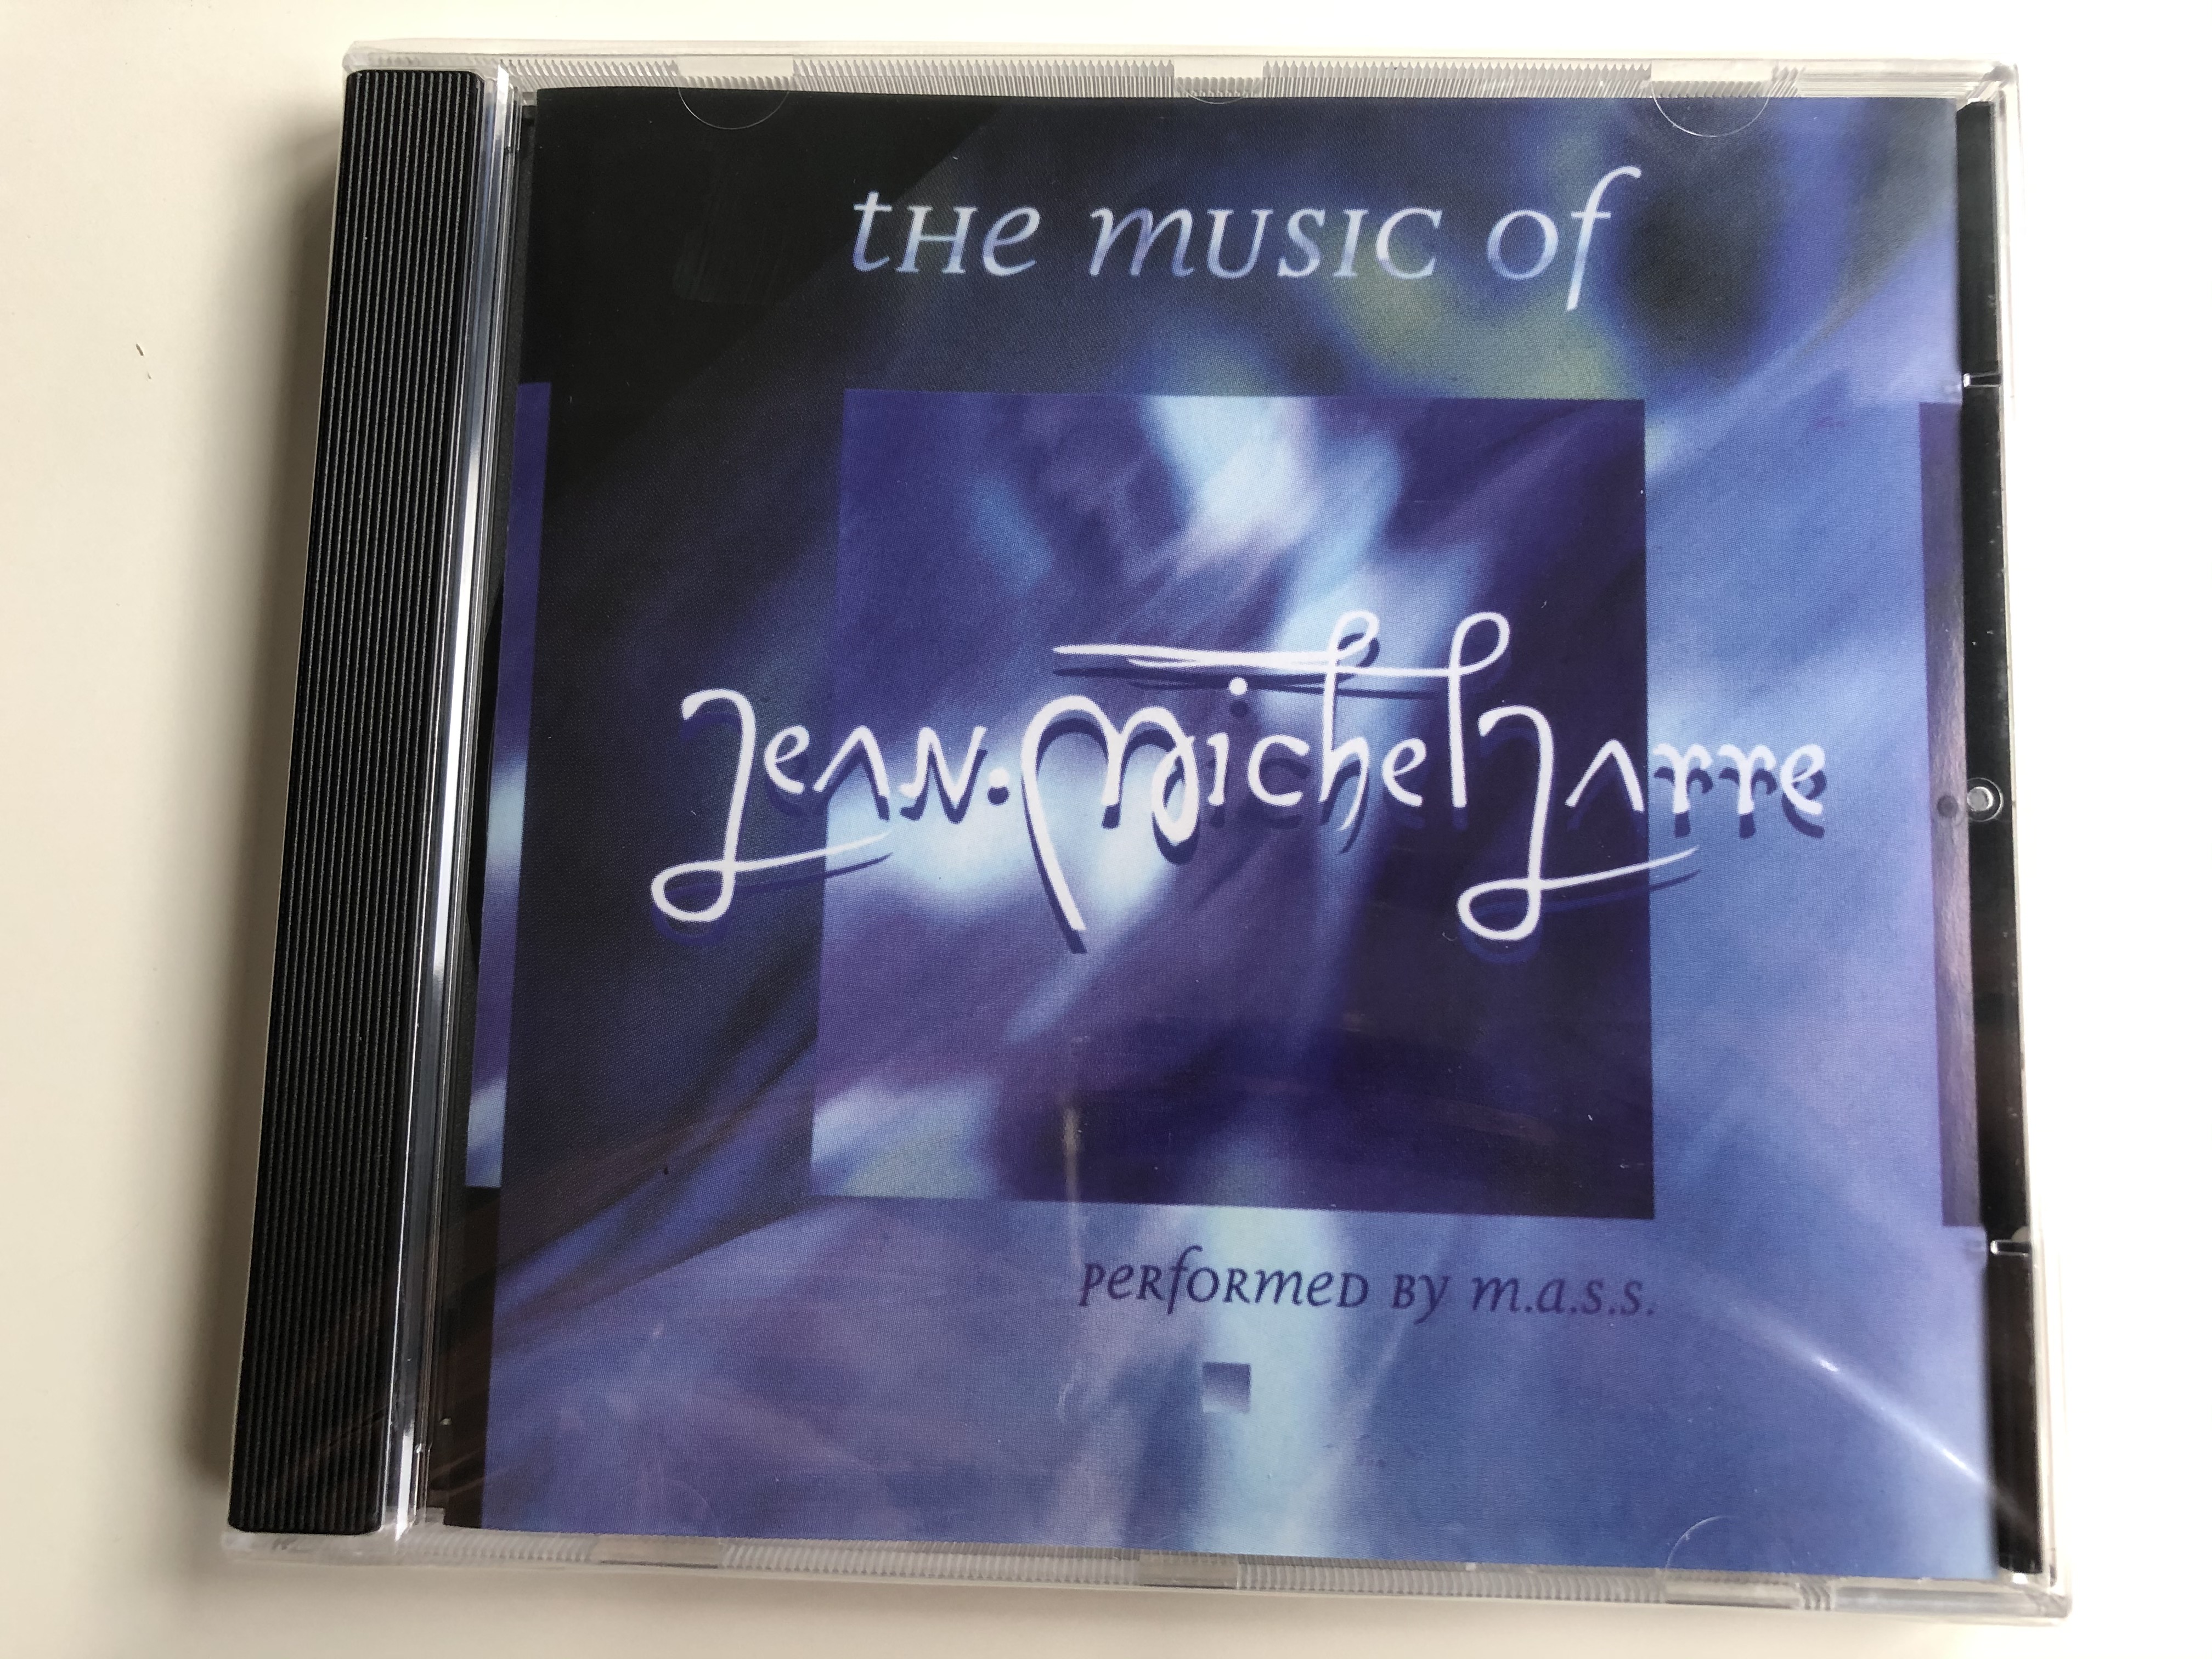 the-music-of-jean-michel-jarre-performed-by-m.a.s.s.-art-music-audio-cd-cd-20-1-.jpg